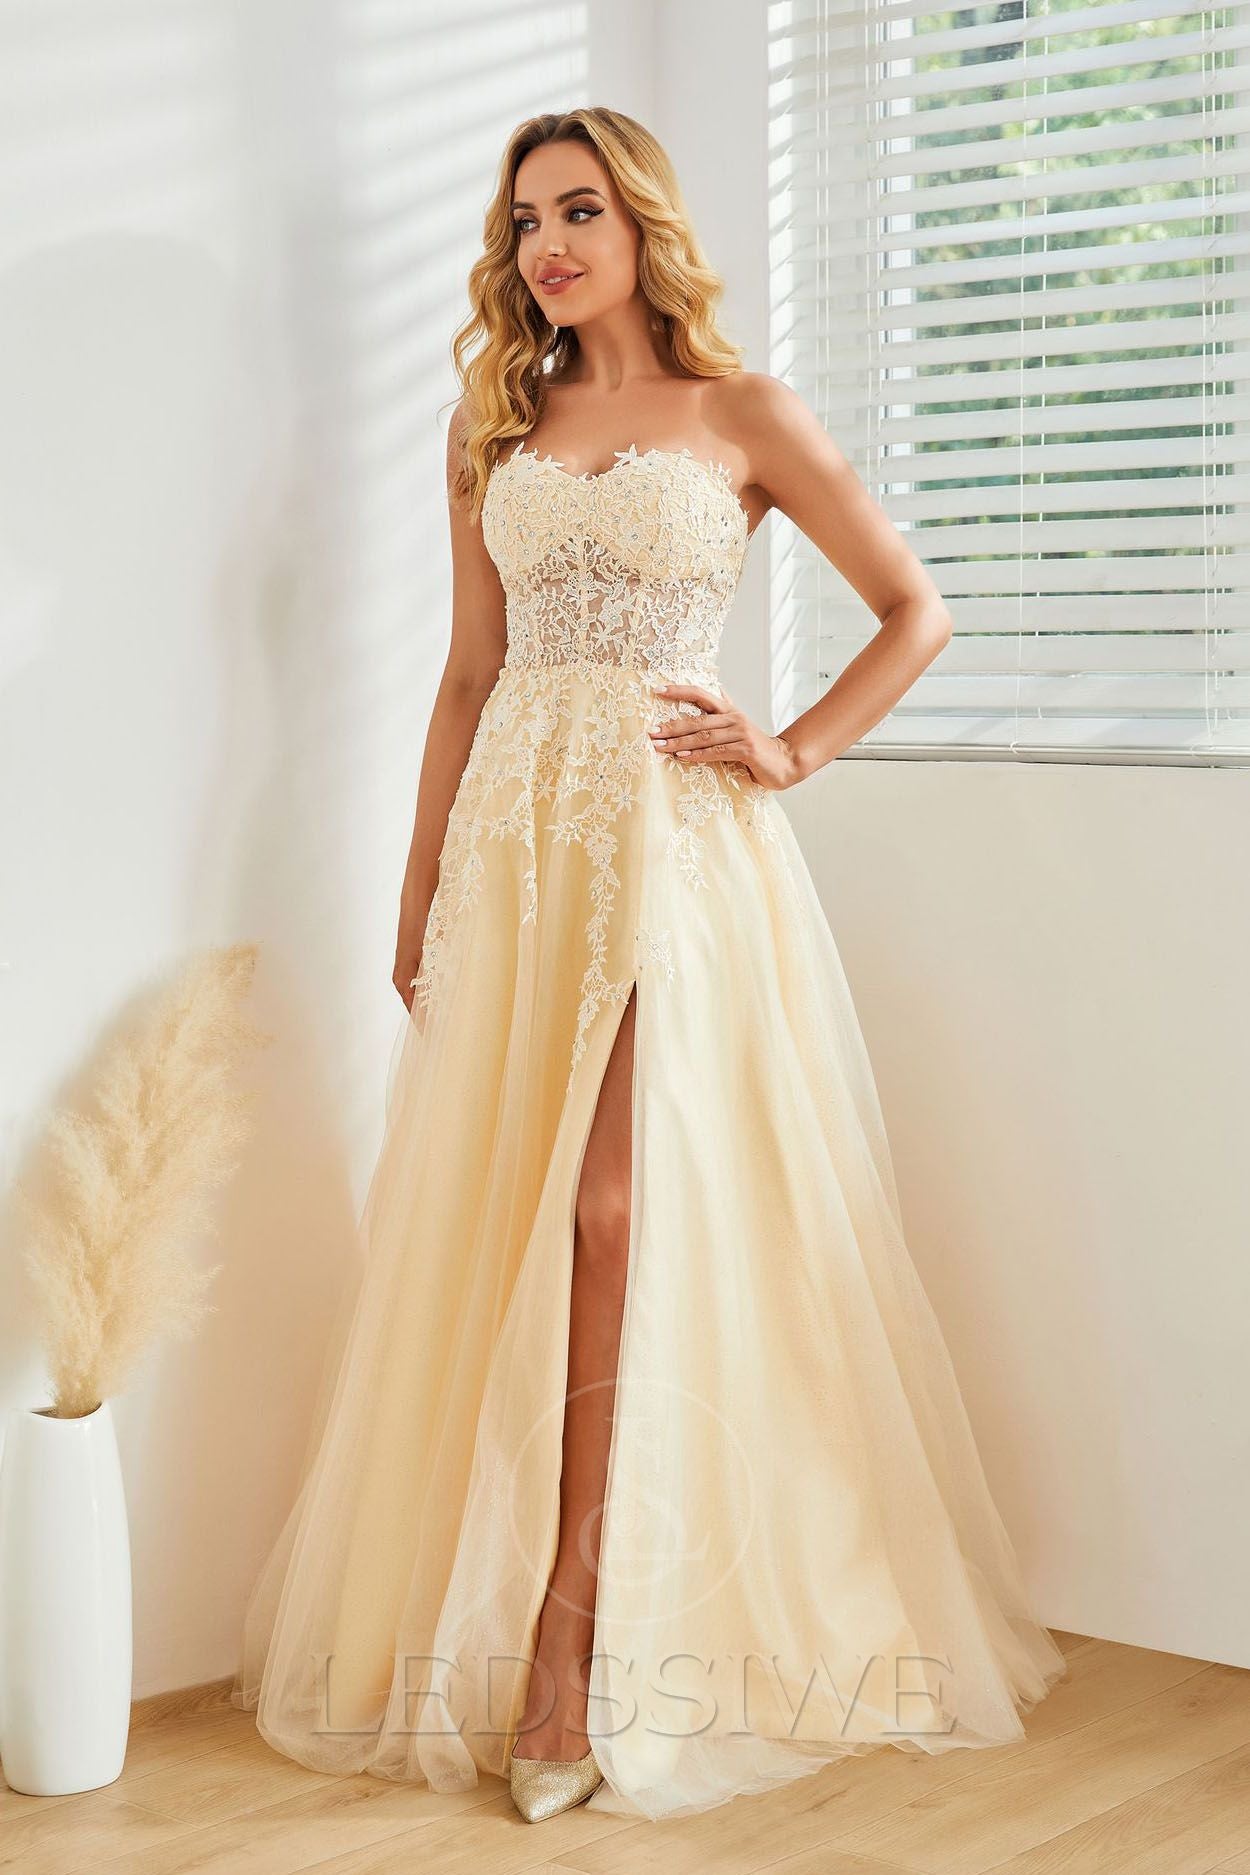 A-Line/Princess Tulle Appliques Strapless Yellow Sleeveless Floor-Length Prom Dresses LSW-290404